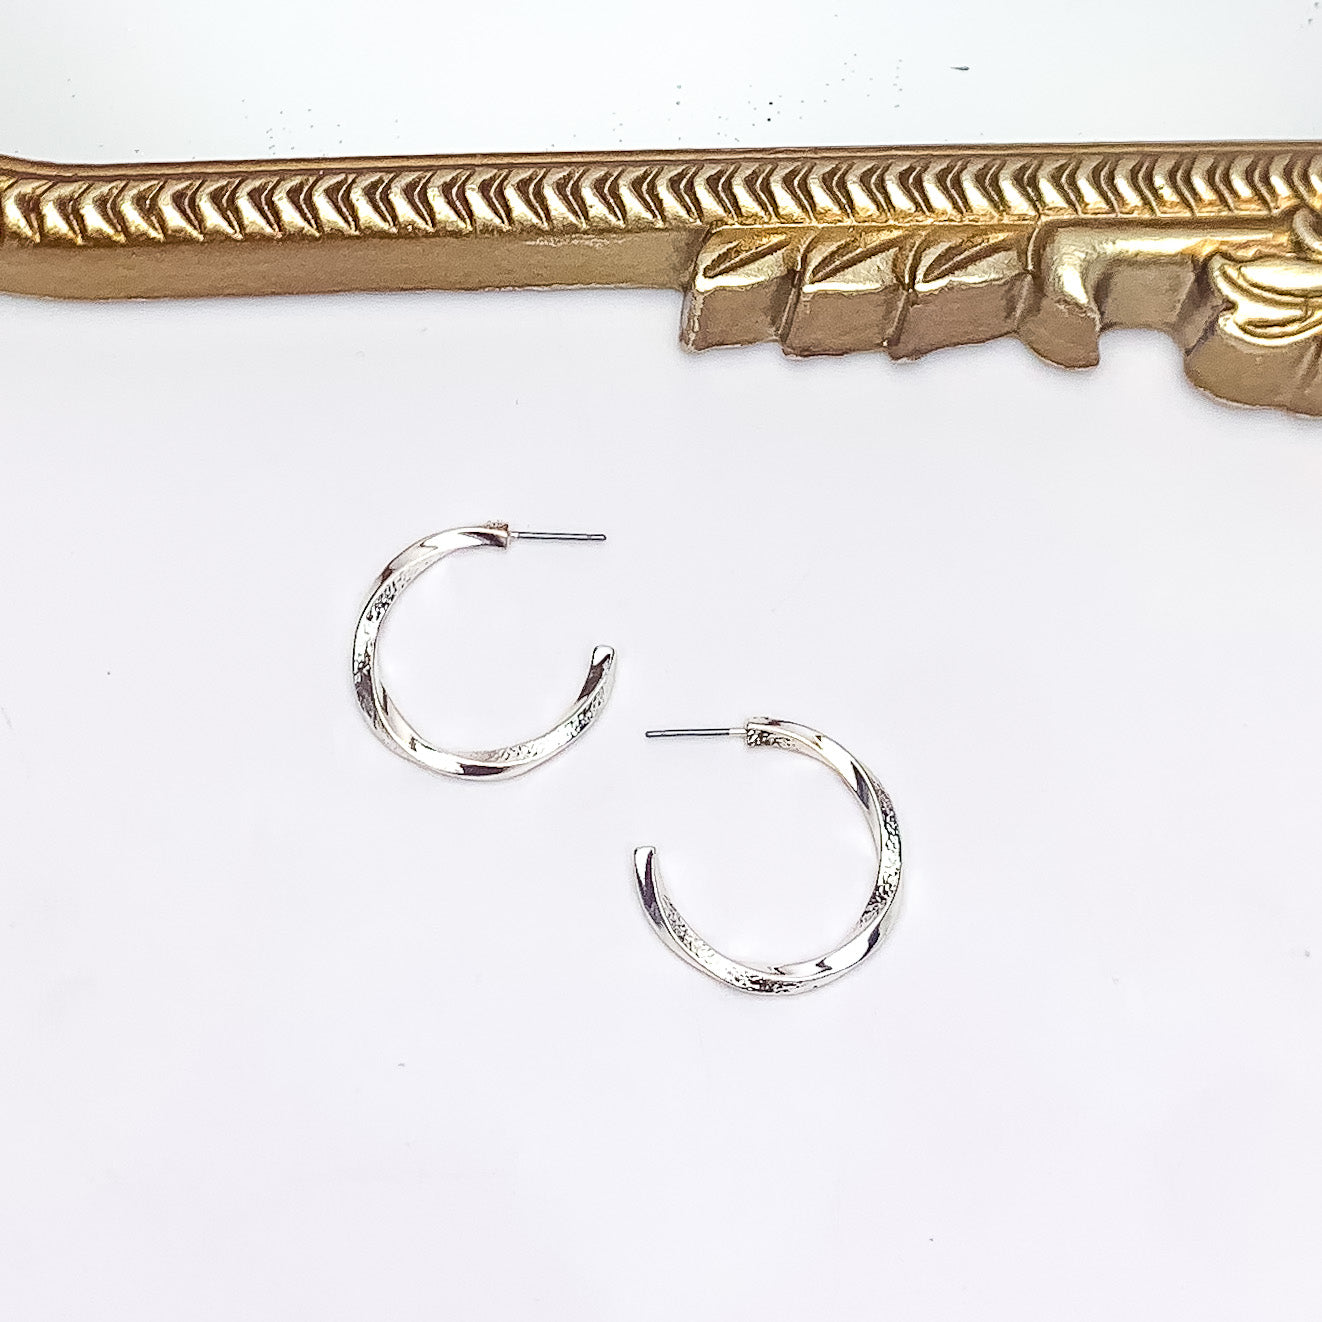 City Day Small Silver Tone Hoop Earrings. Pictured on a white background with a gold frame above the earrings